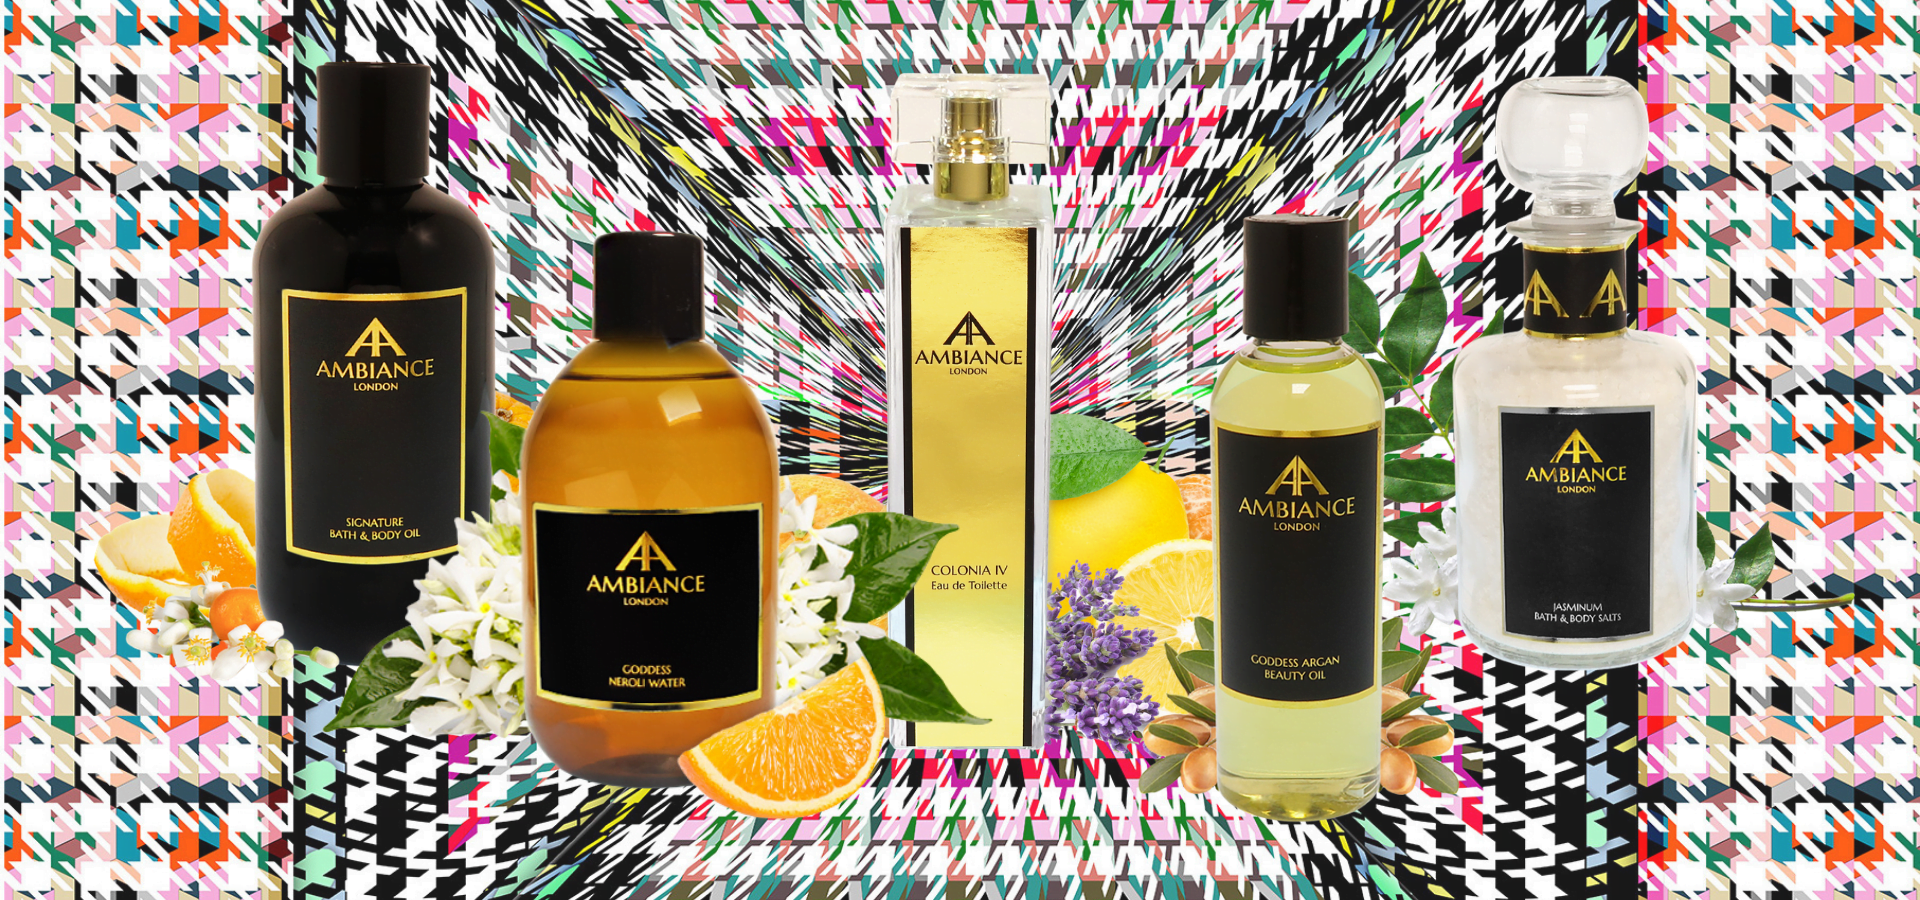 Reviving scents and skincare for Spring - Ancienne Ambiance top picks for spring